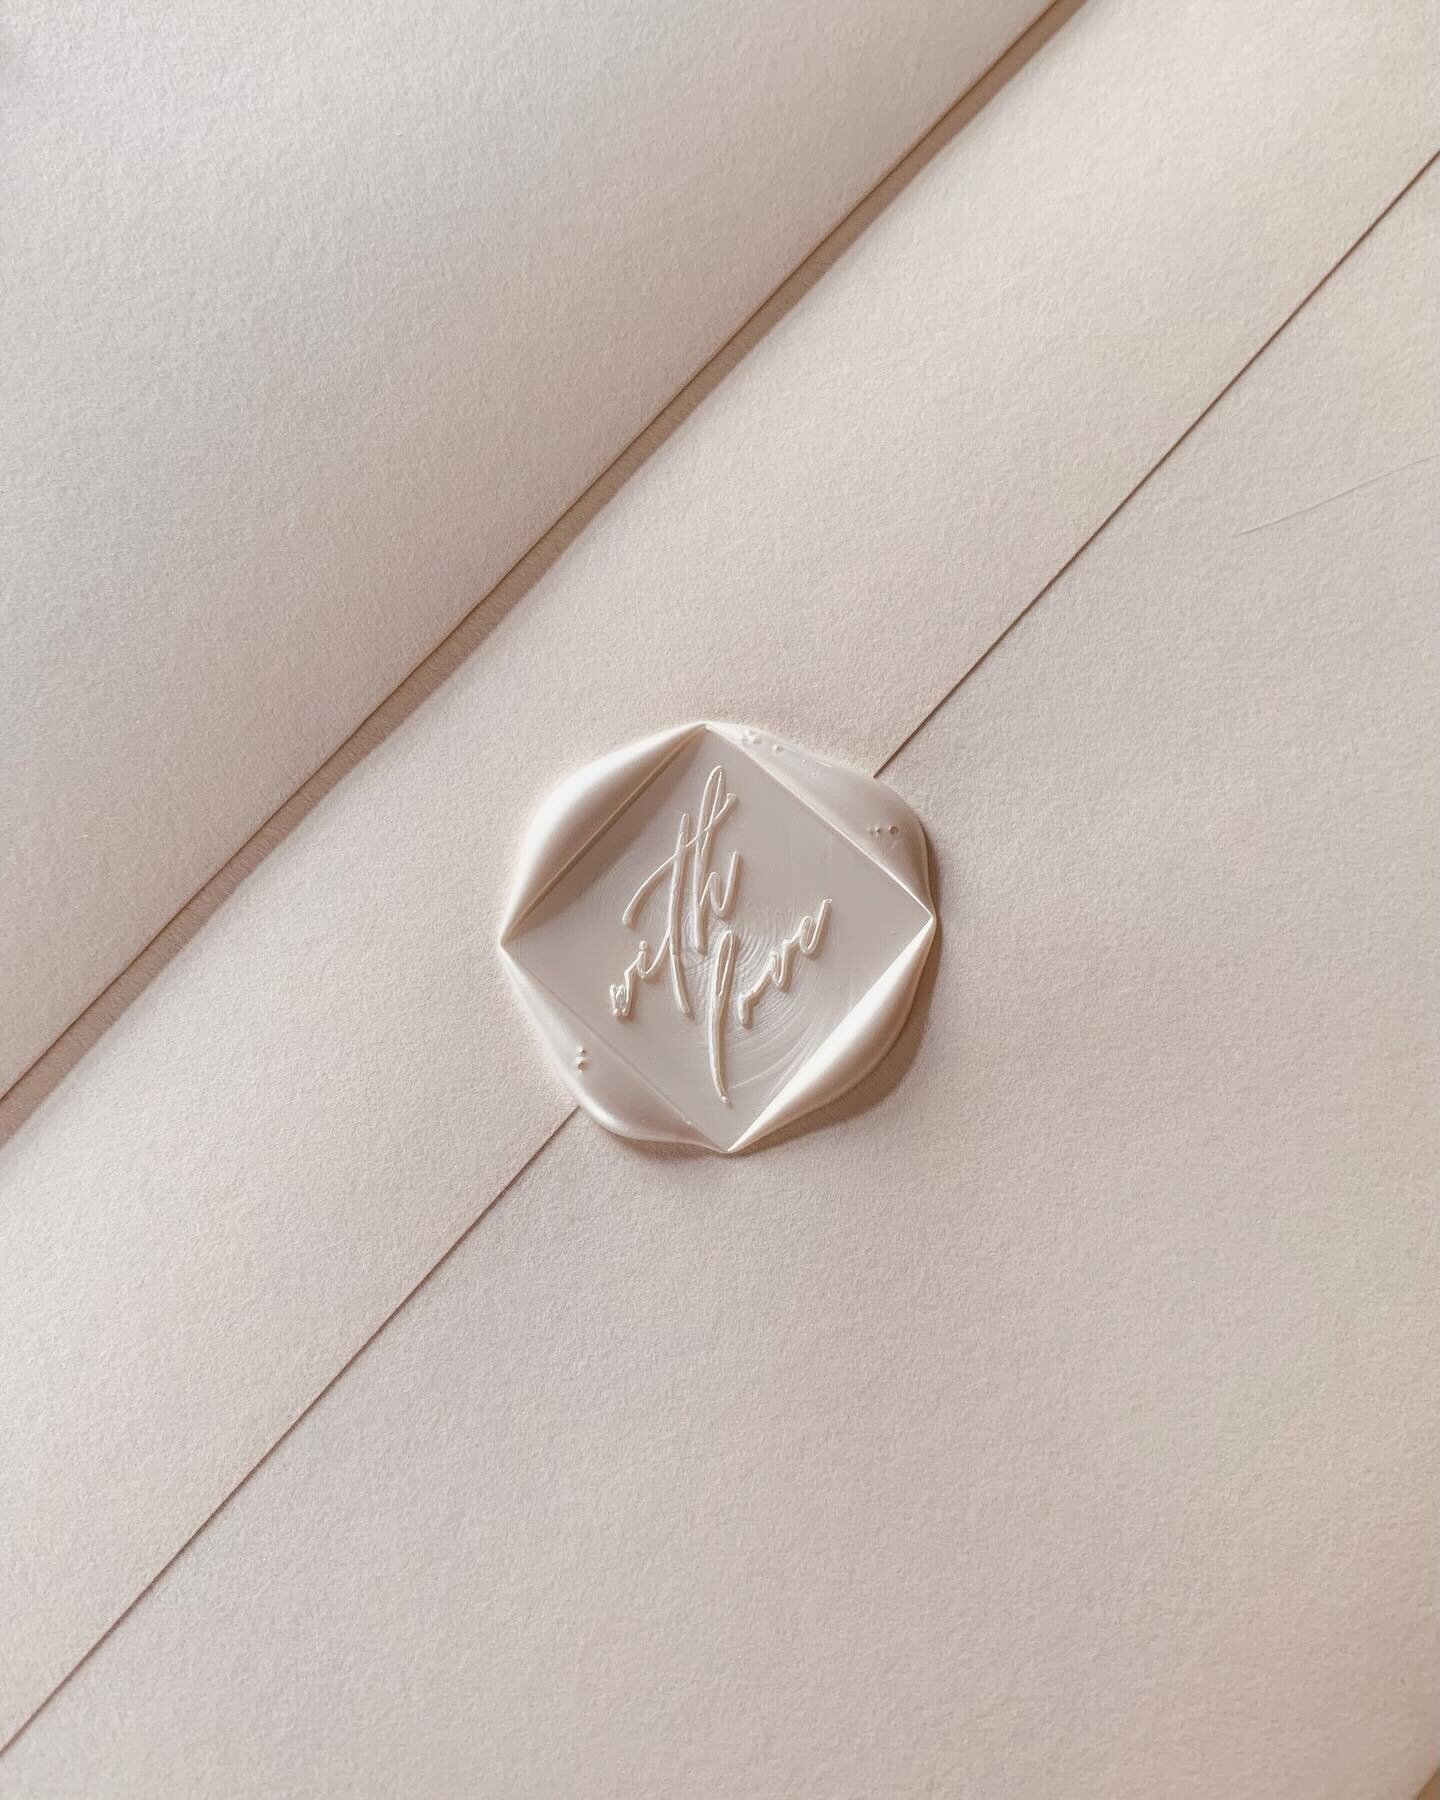 Working on some wonderful suites this week! There&rsquo;s a lot of prettiness on my desk heading out to couples over the next few days. White pearl on the palest of blush for a wedding at the Queen&rsquo;s House later this year 💌 happy post to delig